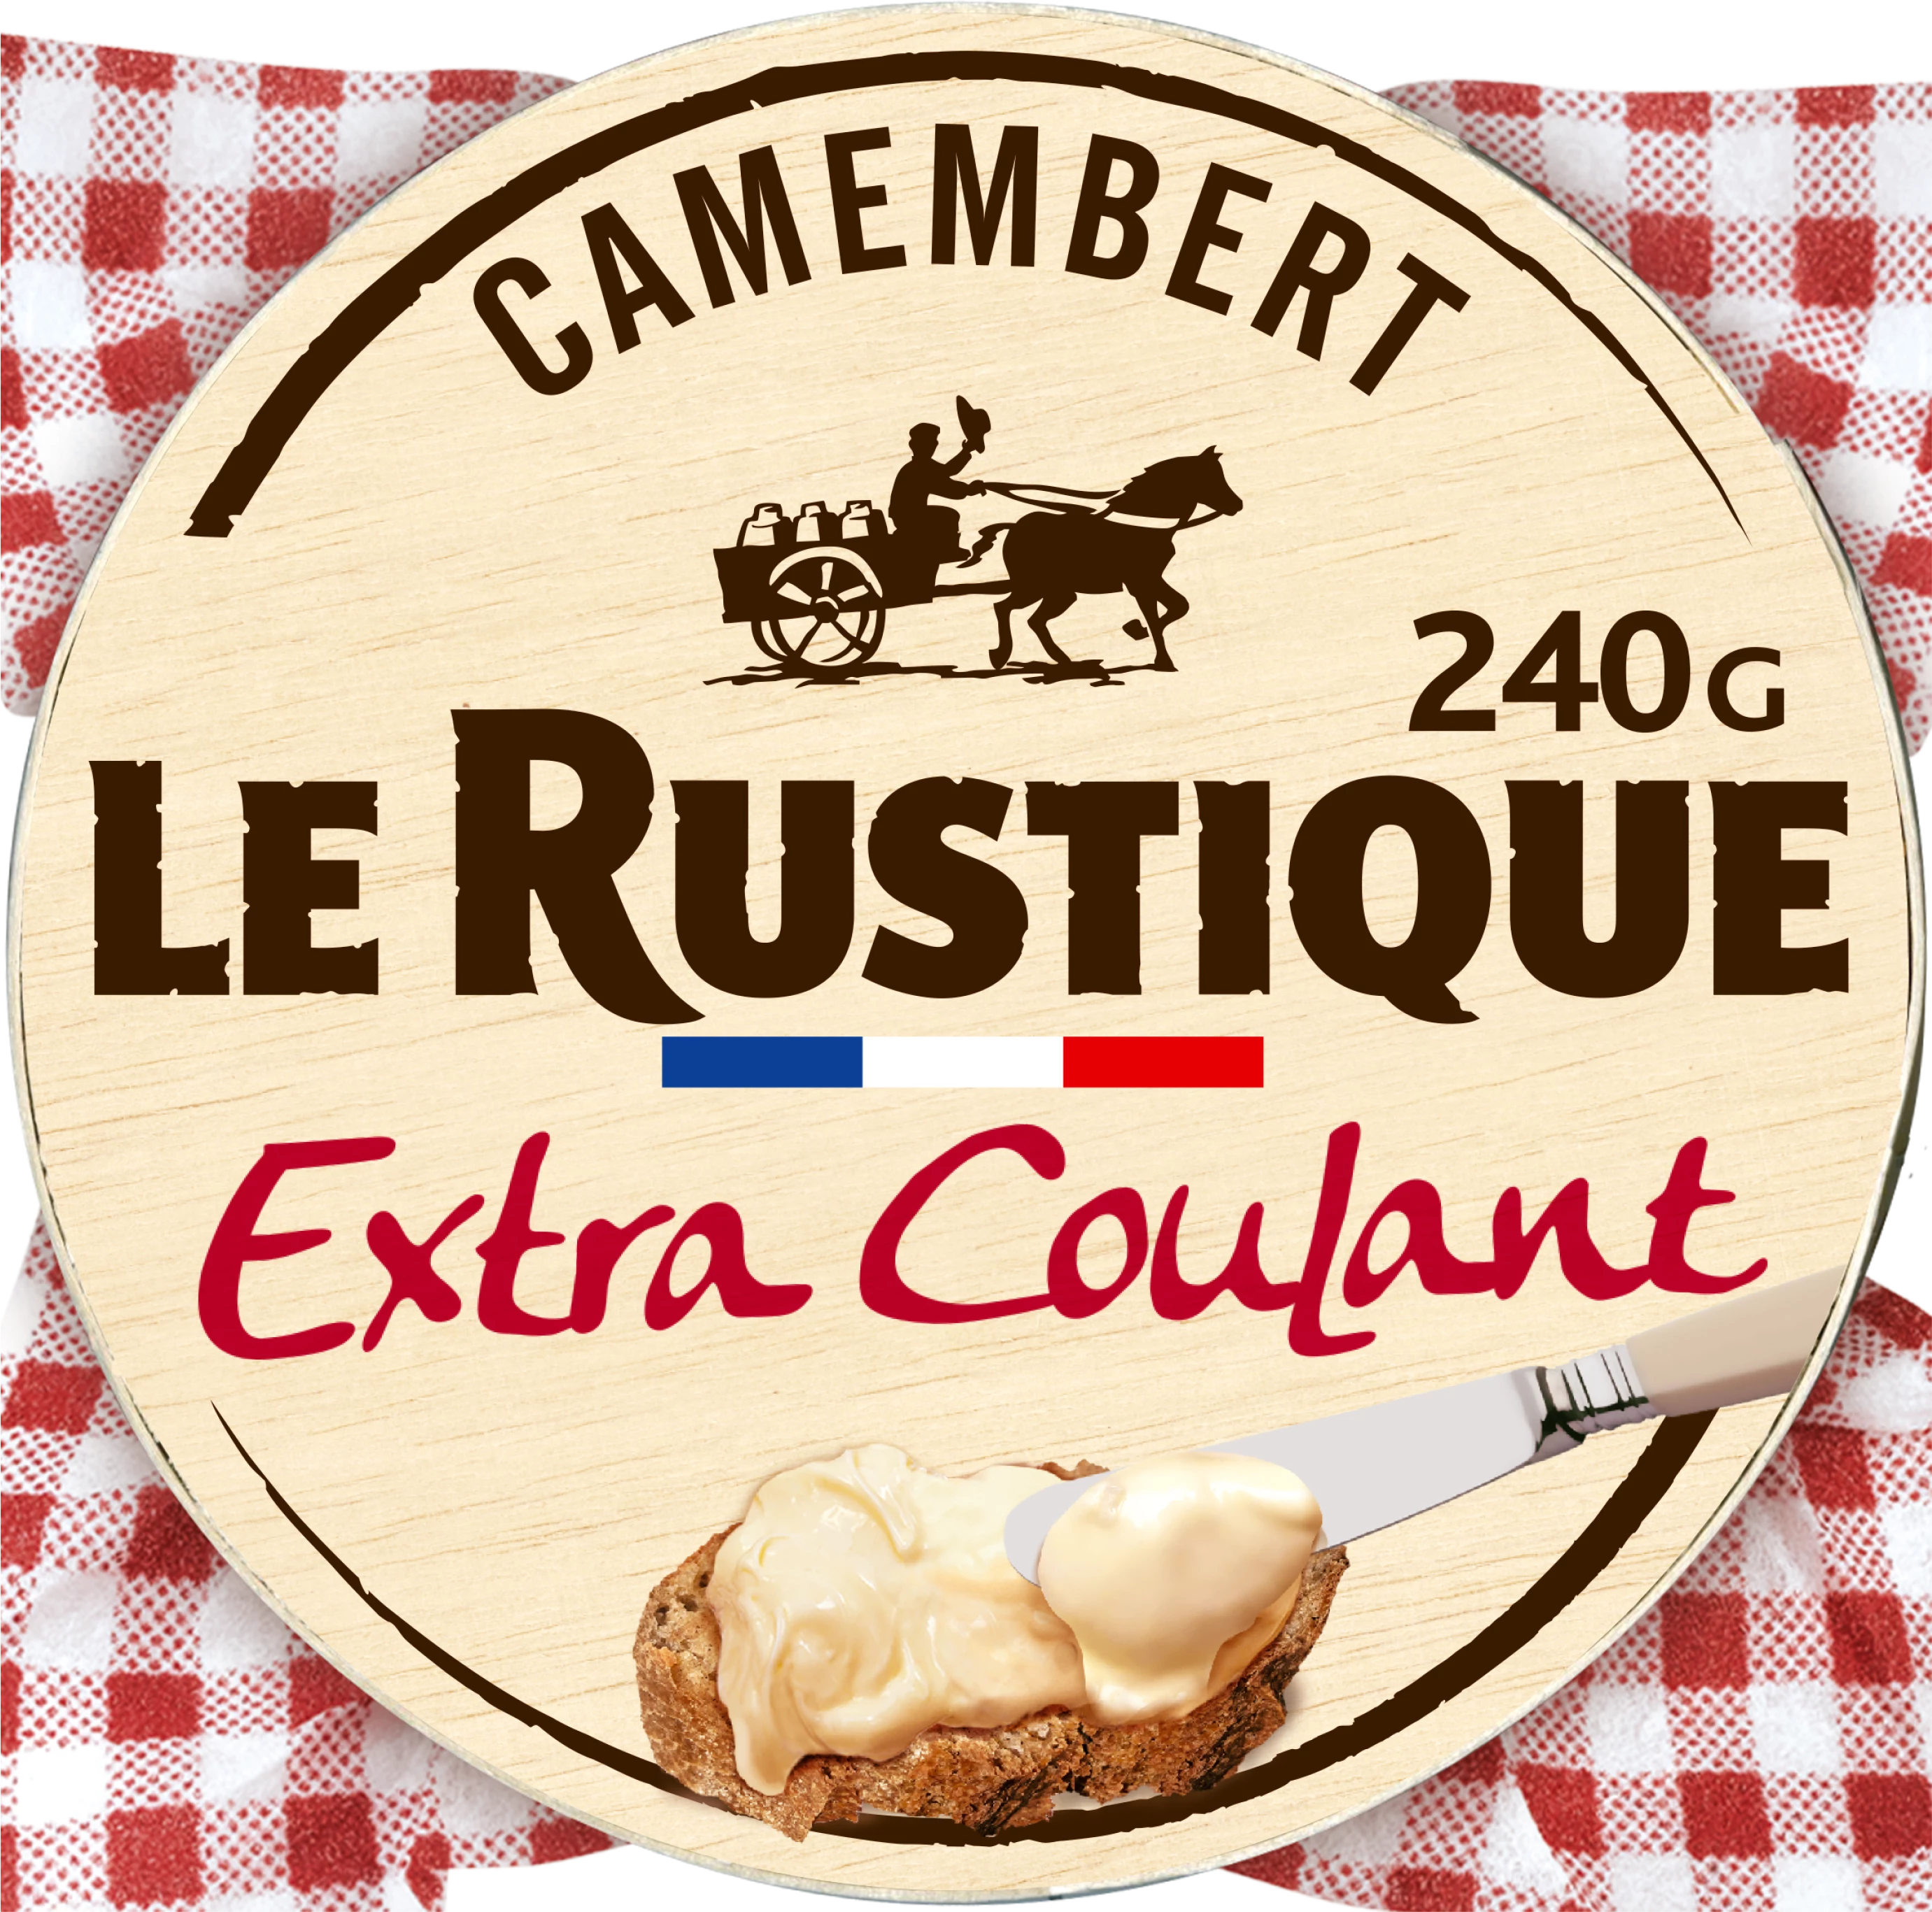 Camembert Extra Coulant 240g L